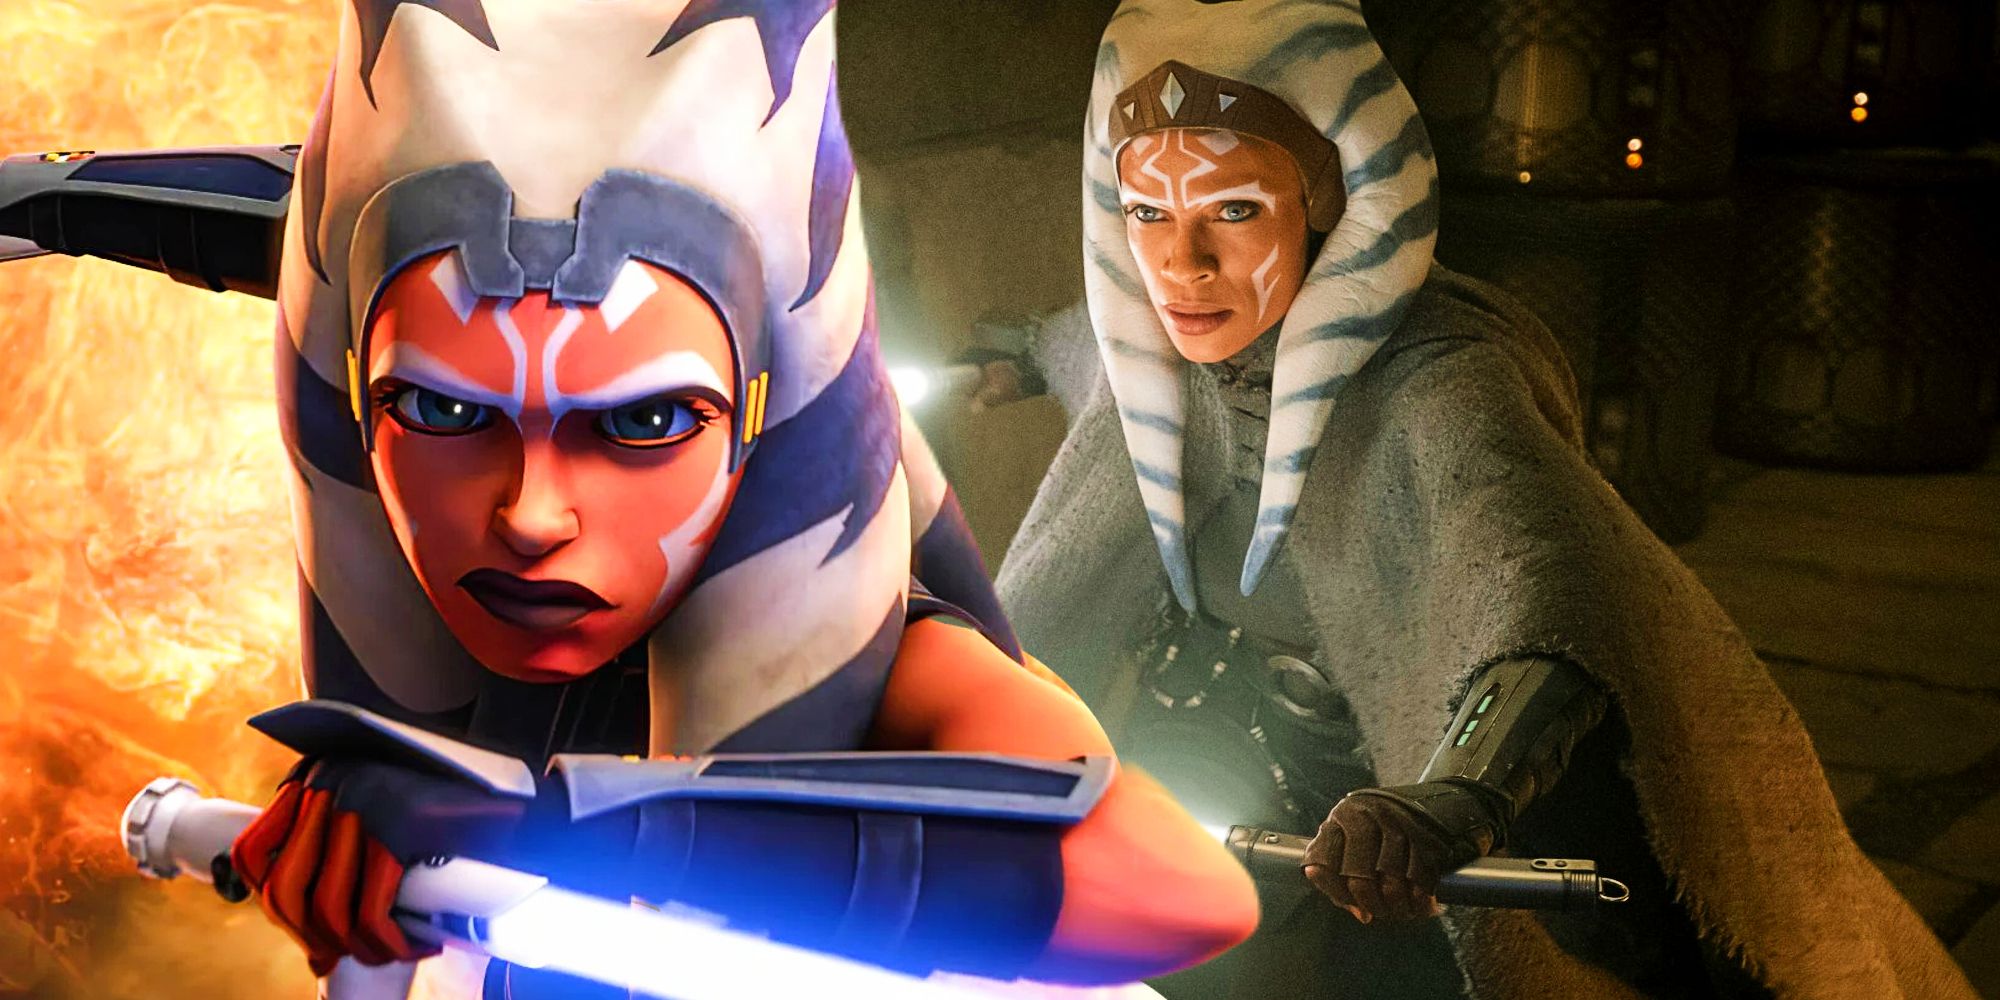 Star Wars Is Setting Up Another Live Action Ahsoka Tano Actor Not Just Rosario Dawson 